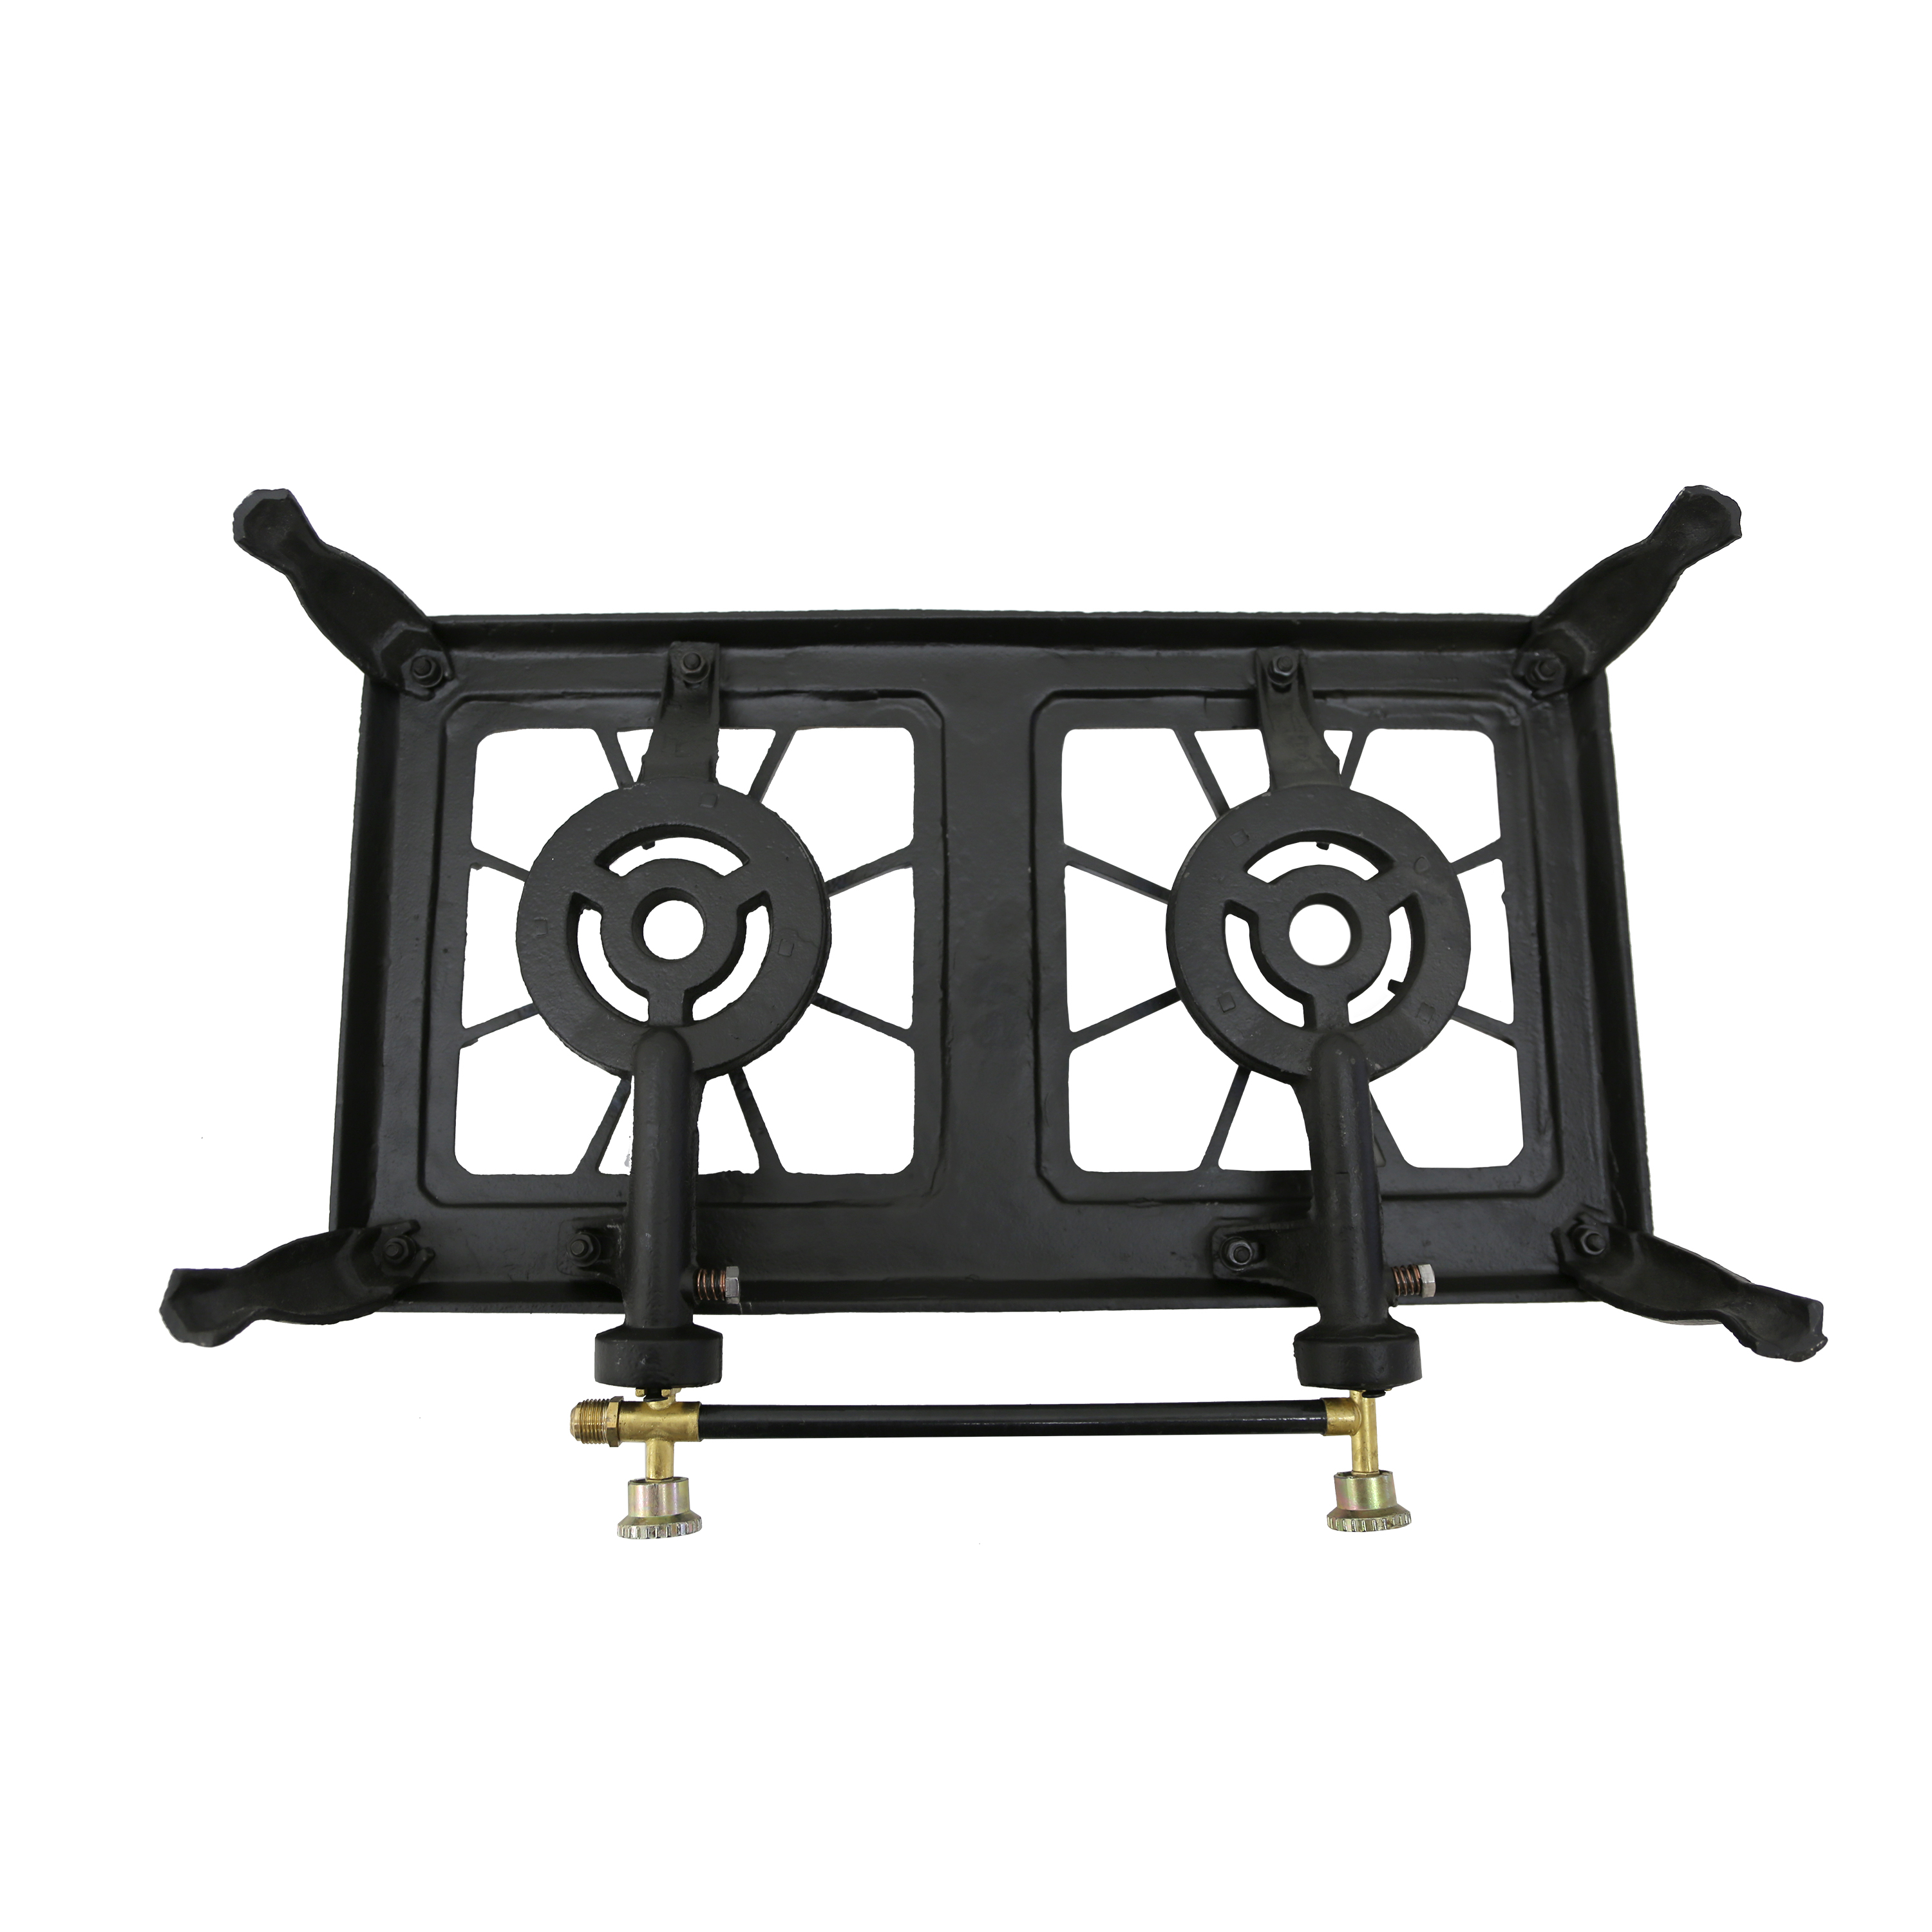 Stansport 209-100 Double Burner Cast Iron Stove with Regulator Hose - 2 Burners For Propane Use - image 3 of 6